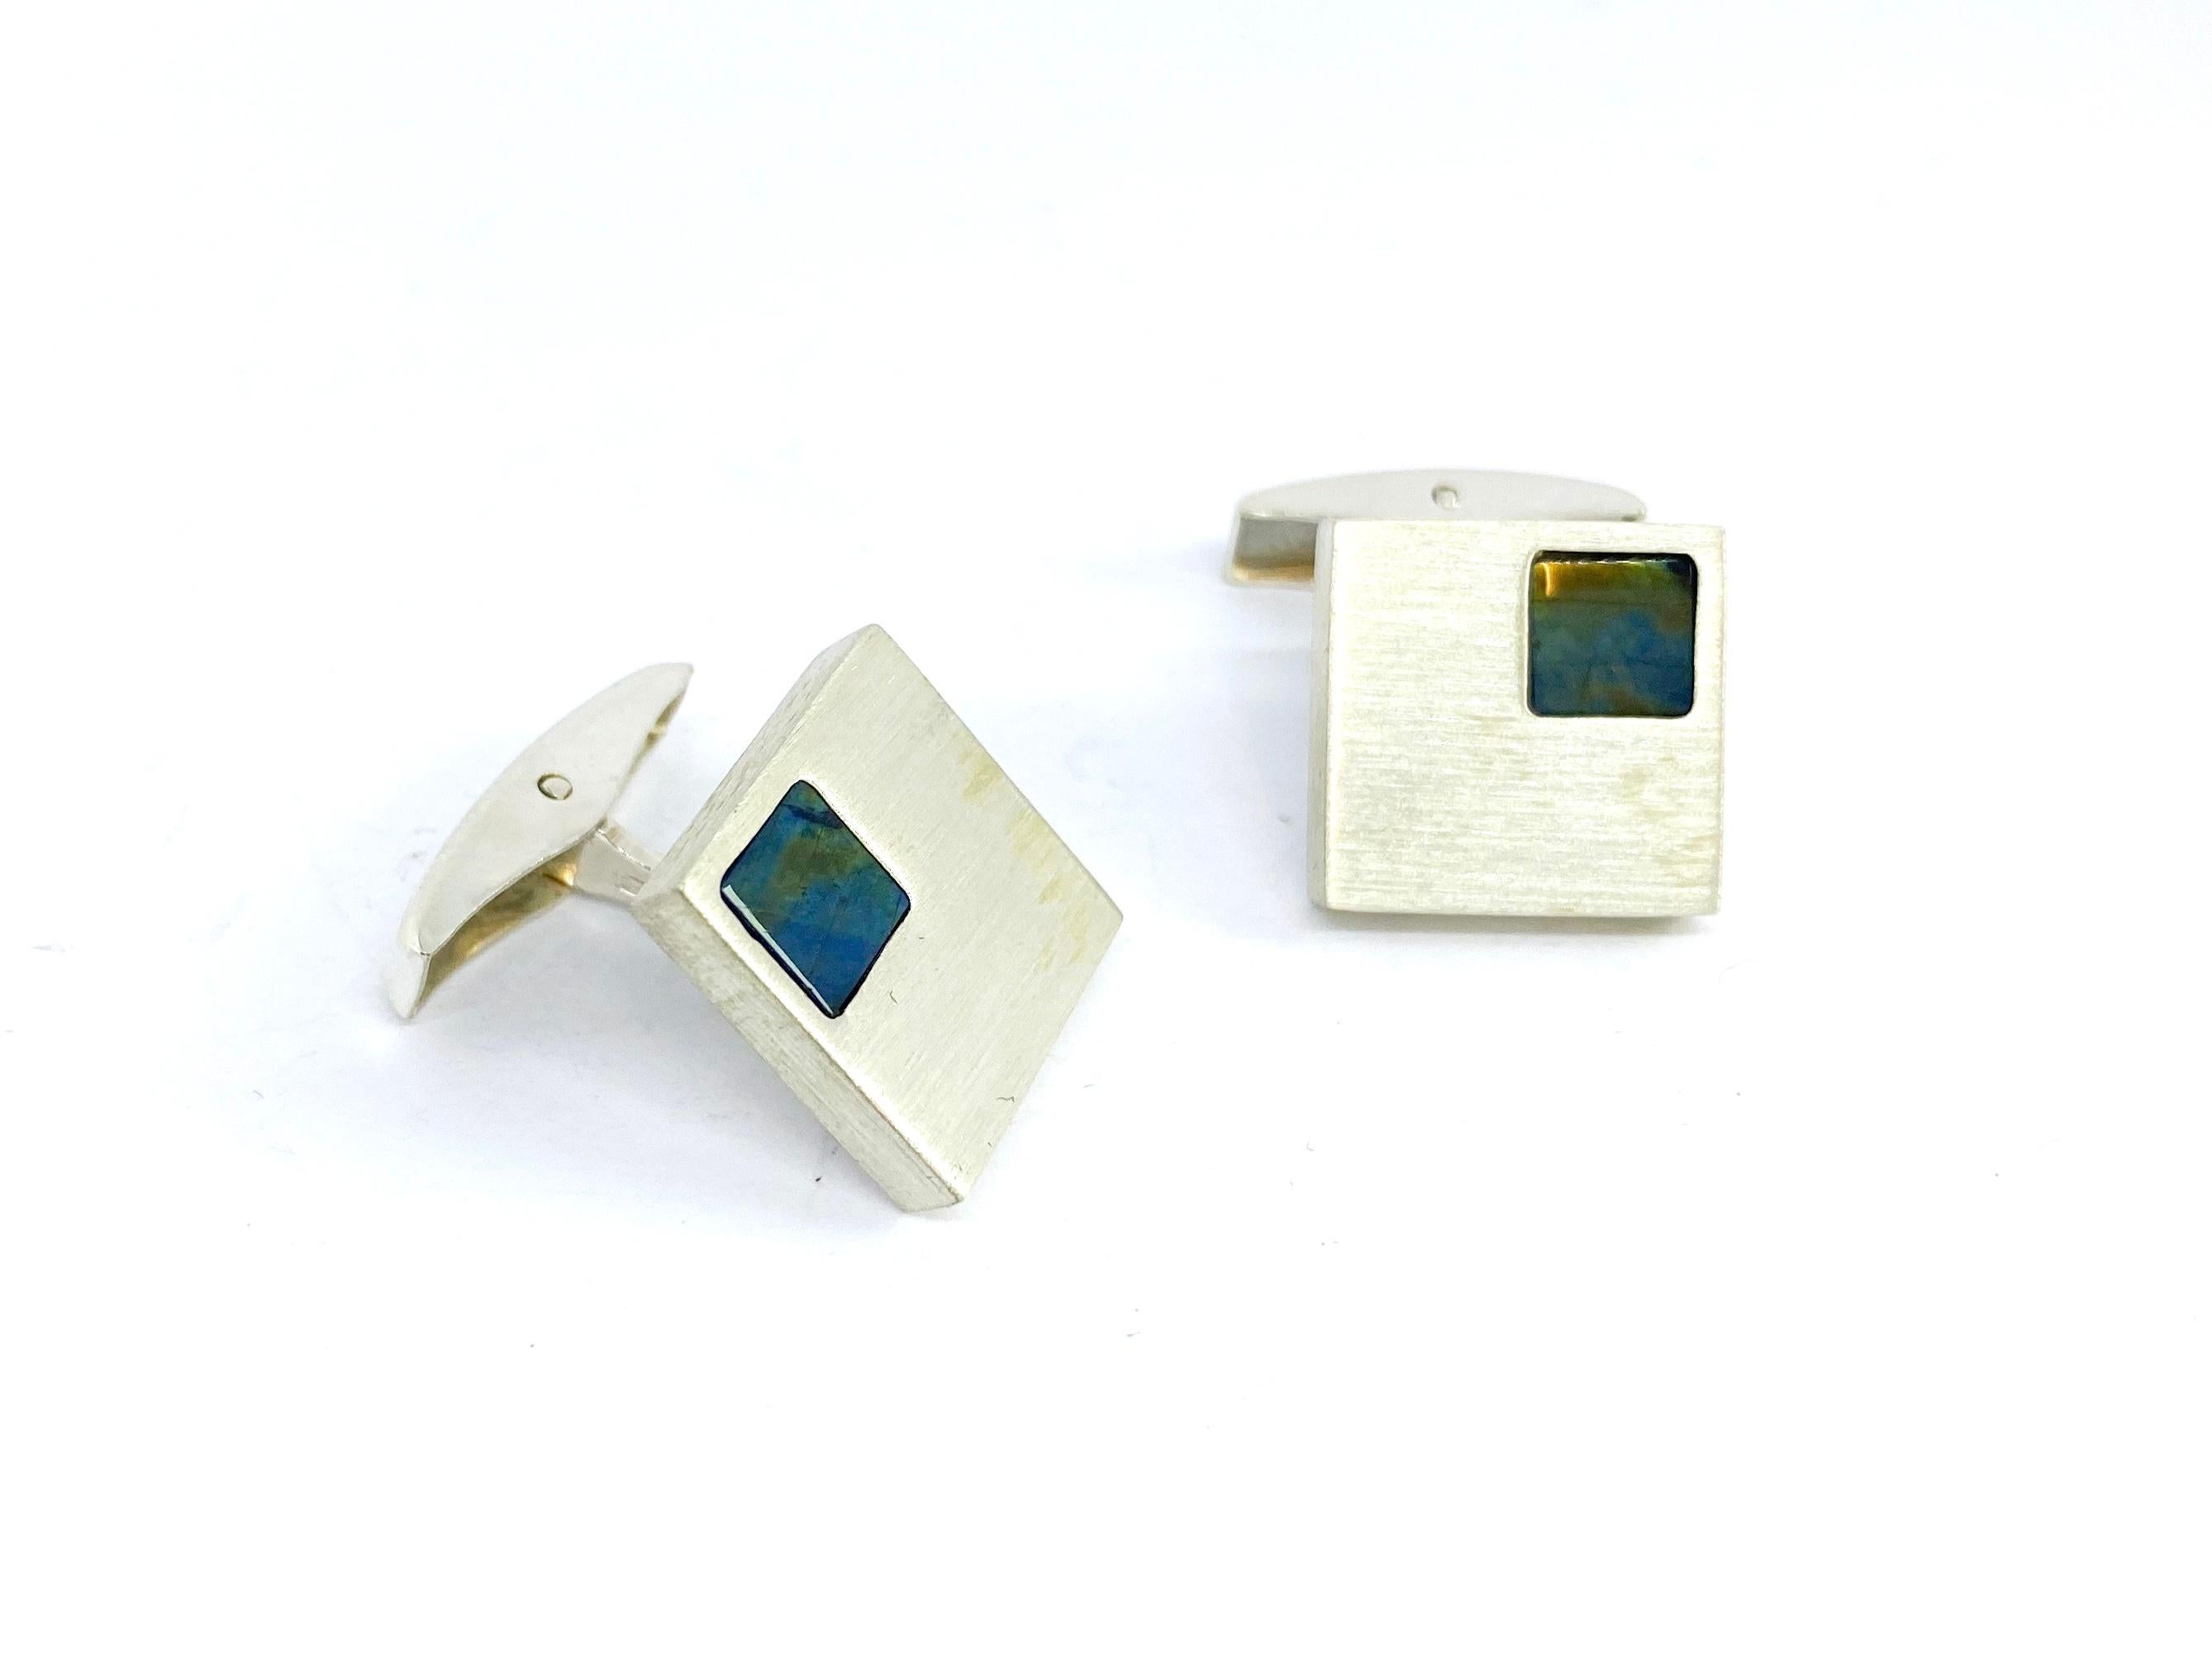 925 Sterling Finland Cufflinks Spectrolite

Unused new Cufflinks.
Stock of an old discontinued jeweler's shop.
Made 1994  Not polished,
Made Vaasa Finland.
Stamp JA =Johan Edvard Appelgren ?

Spectrolite Stone:
Due to its brilliant light effect in